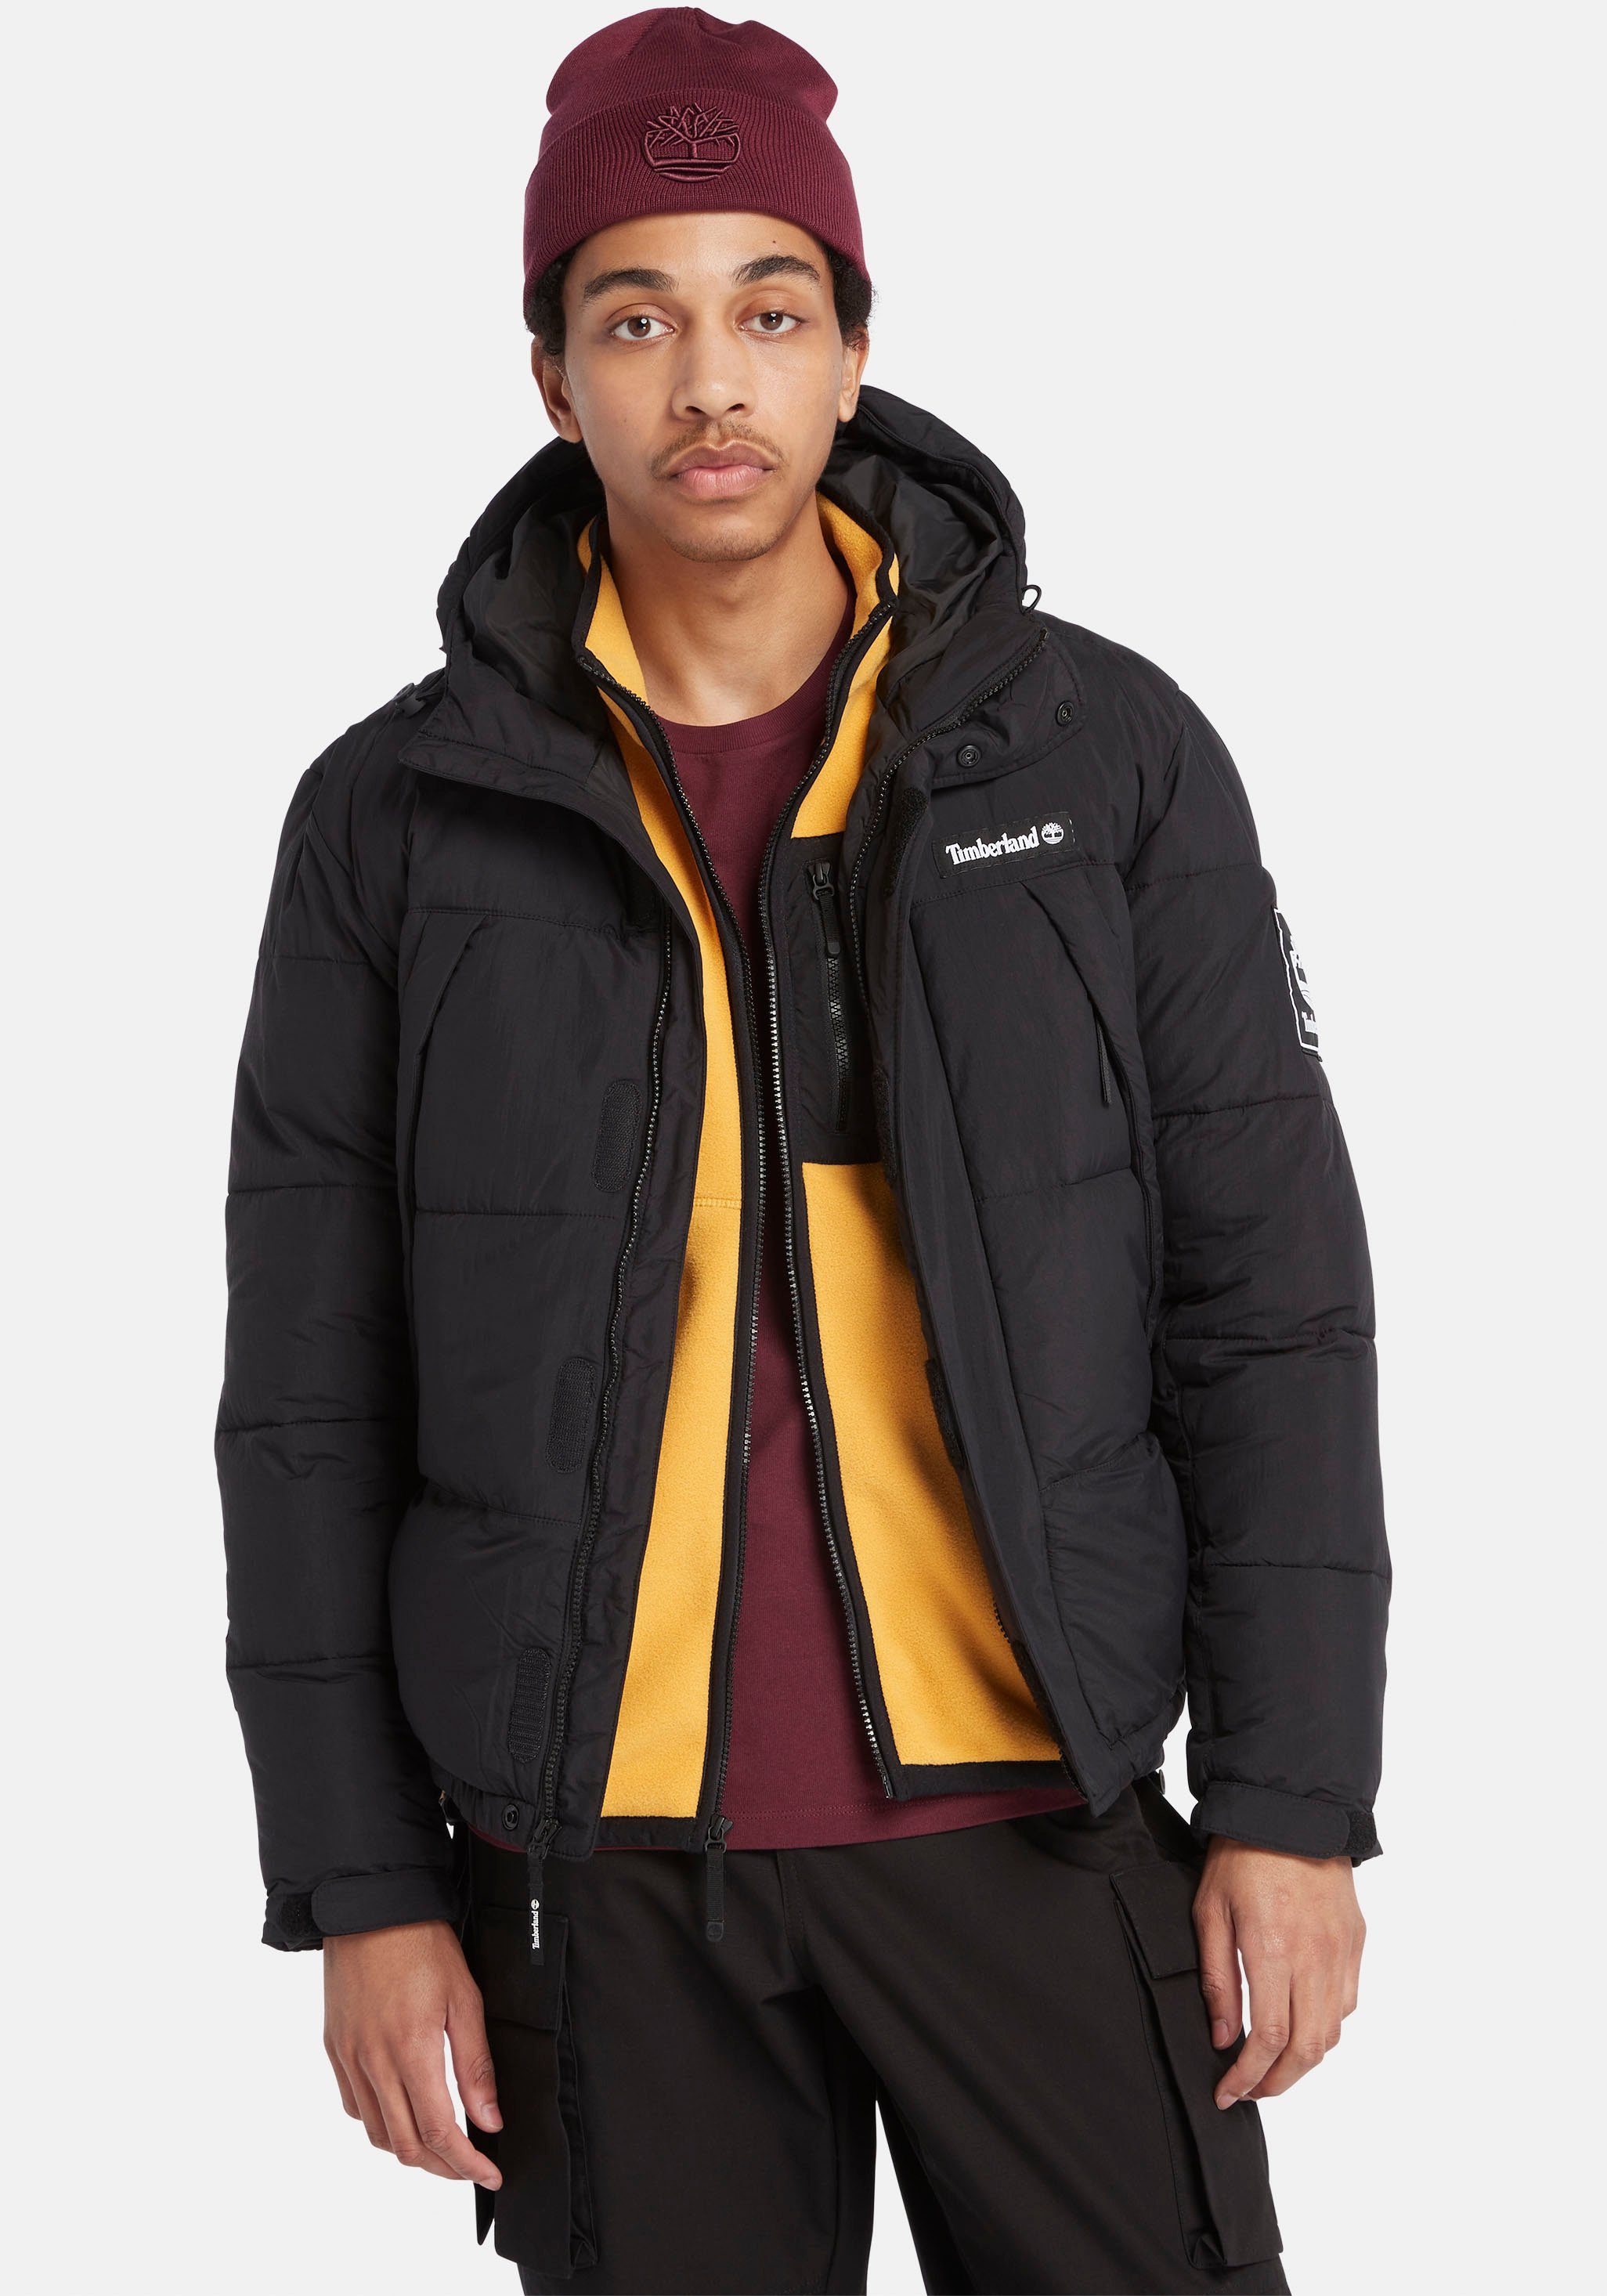 Jacket black Outdoorjacke DWR Archive Timberland Outdoor Puffer